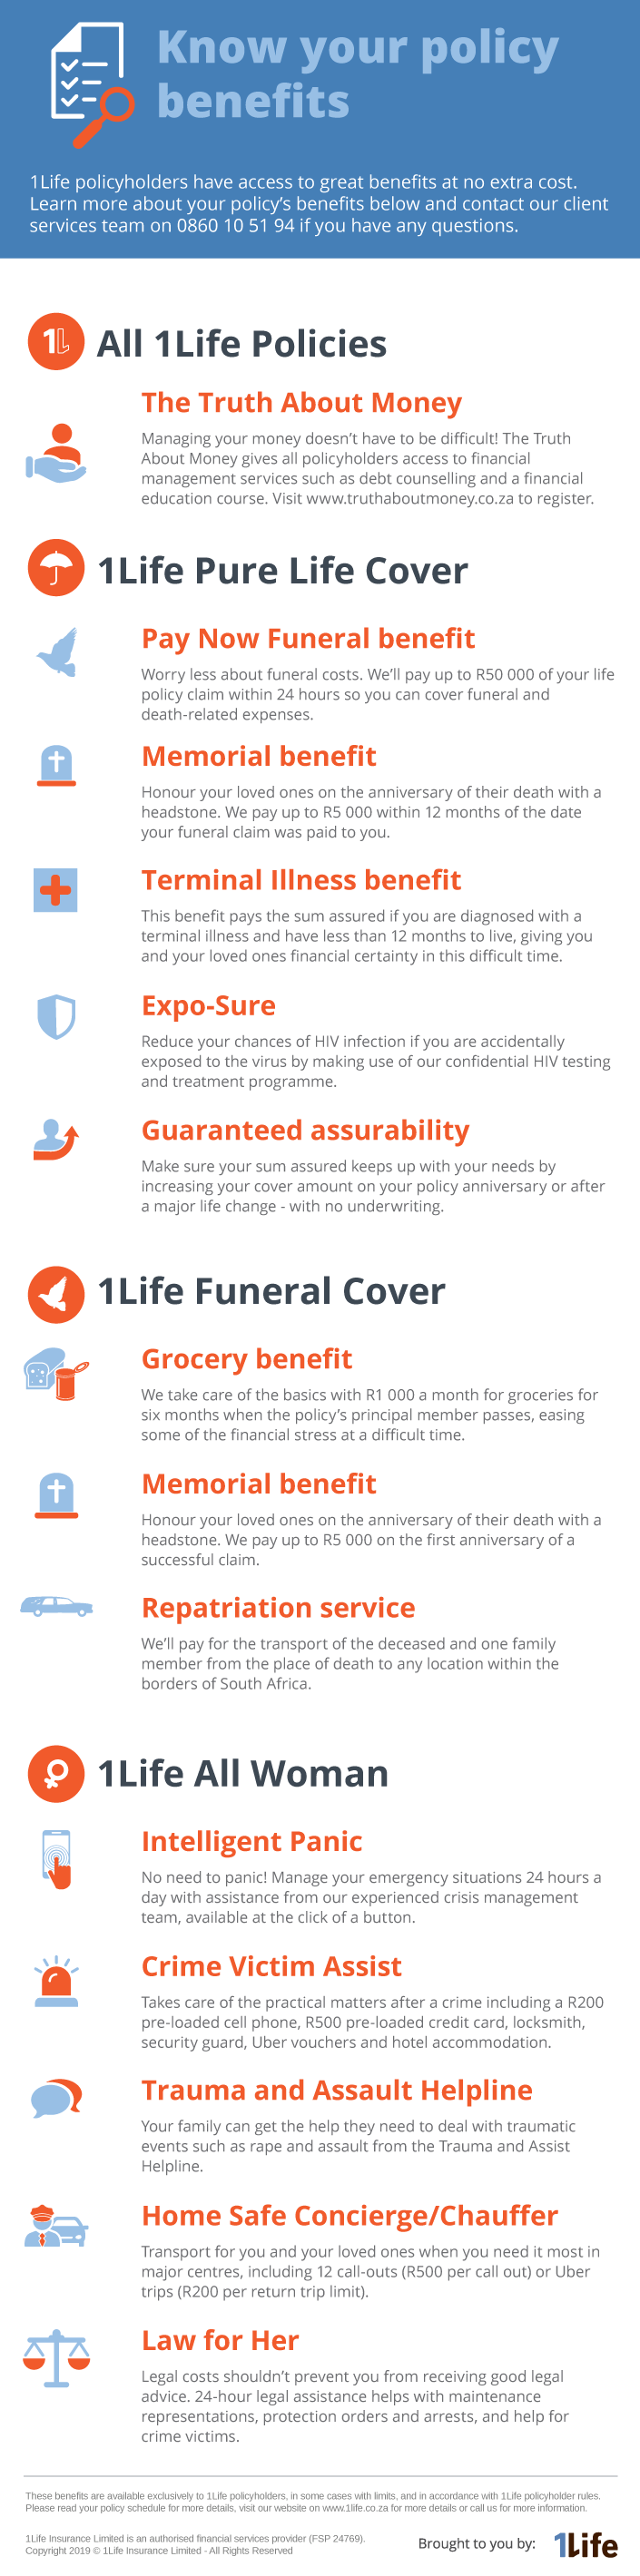 Know your policy benefits